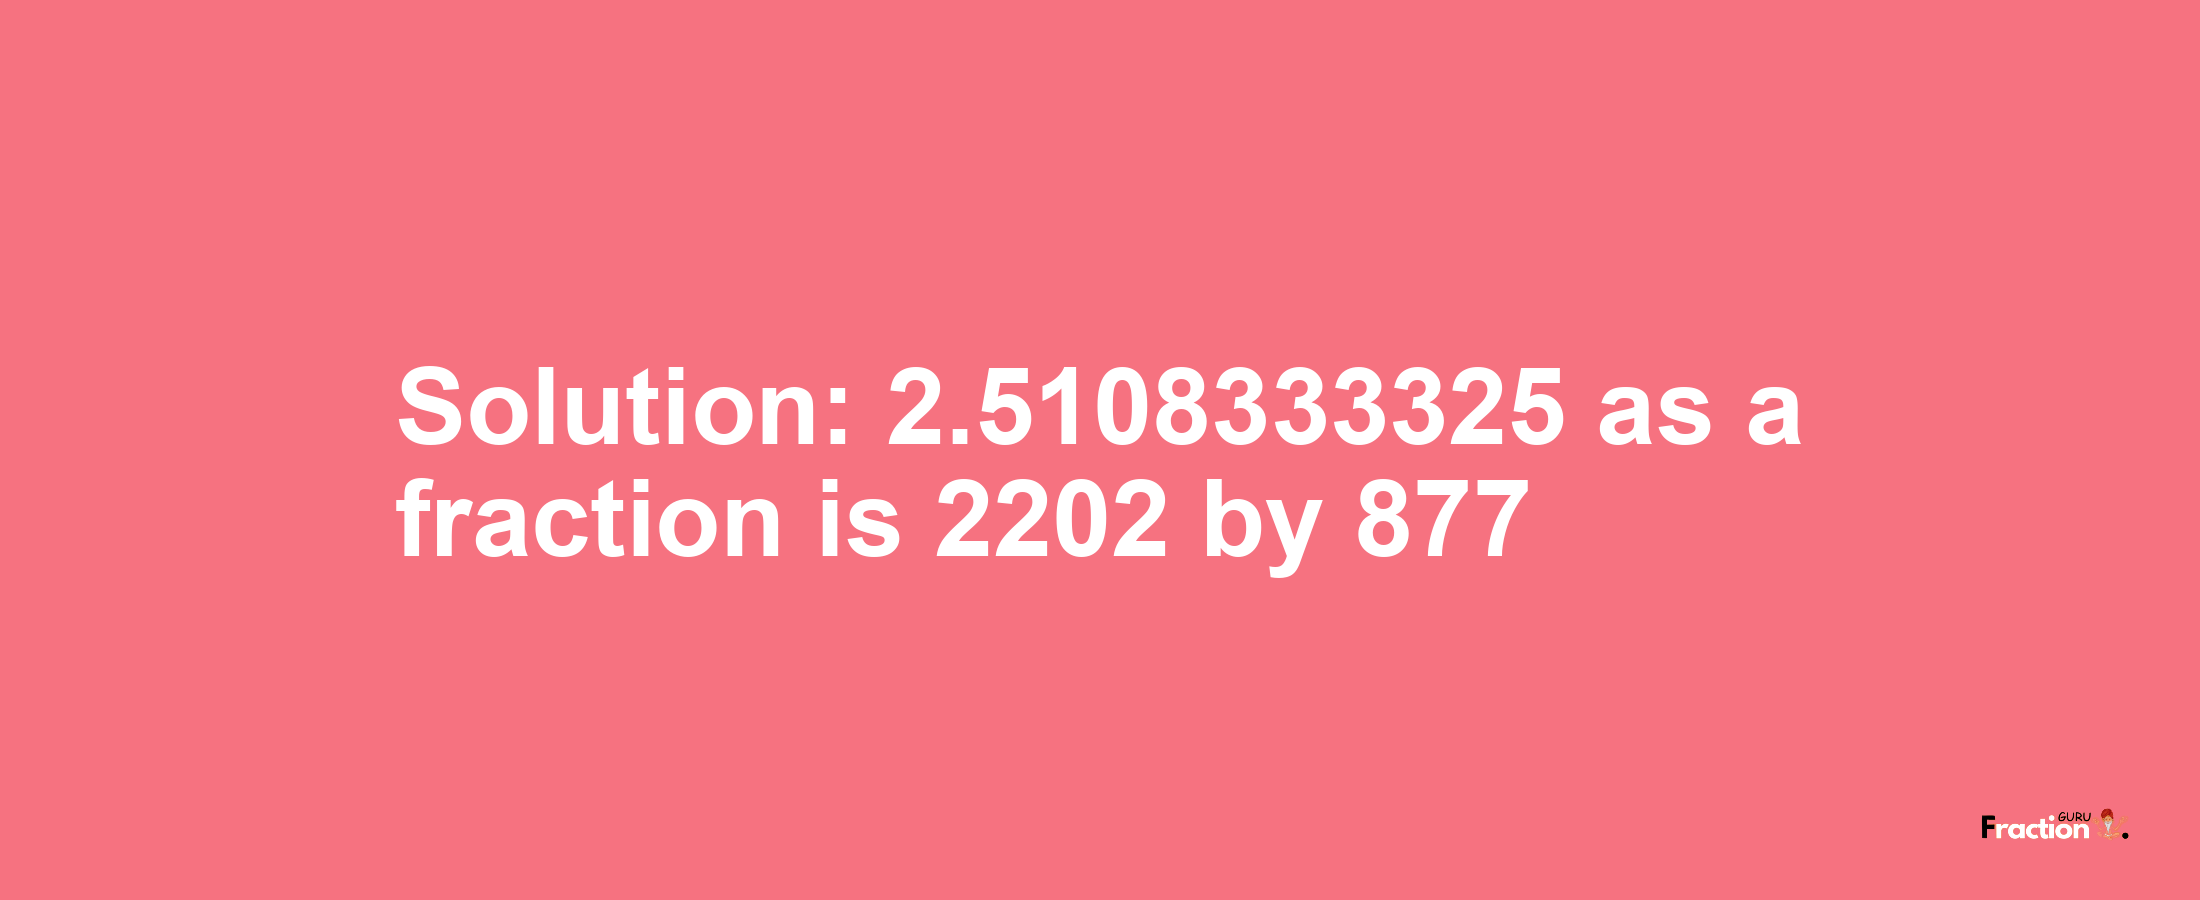 Solution:2.5108333325 as a fraction is 2202/877